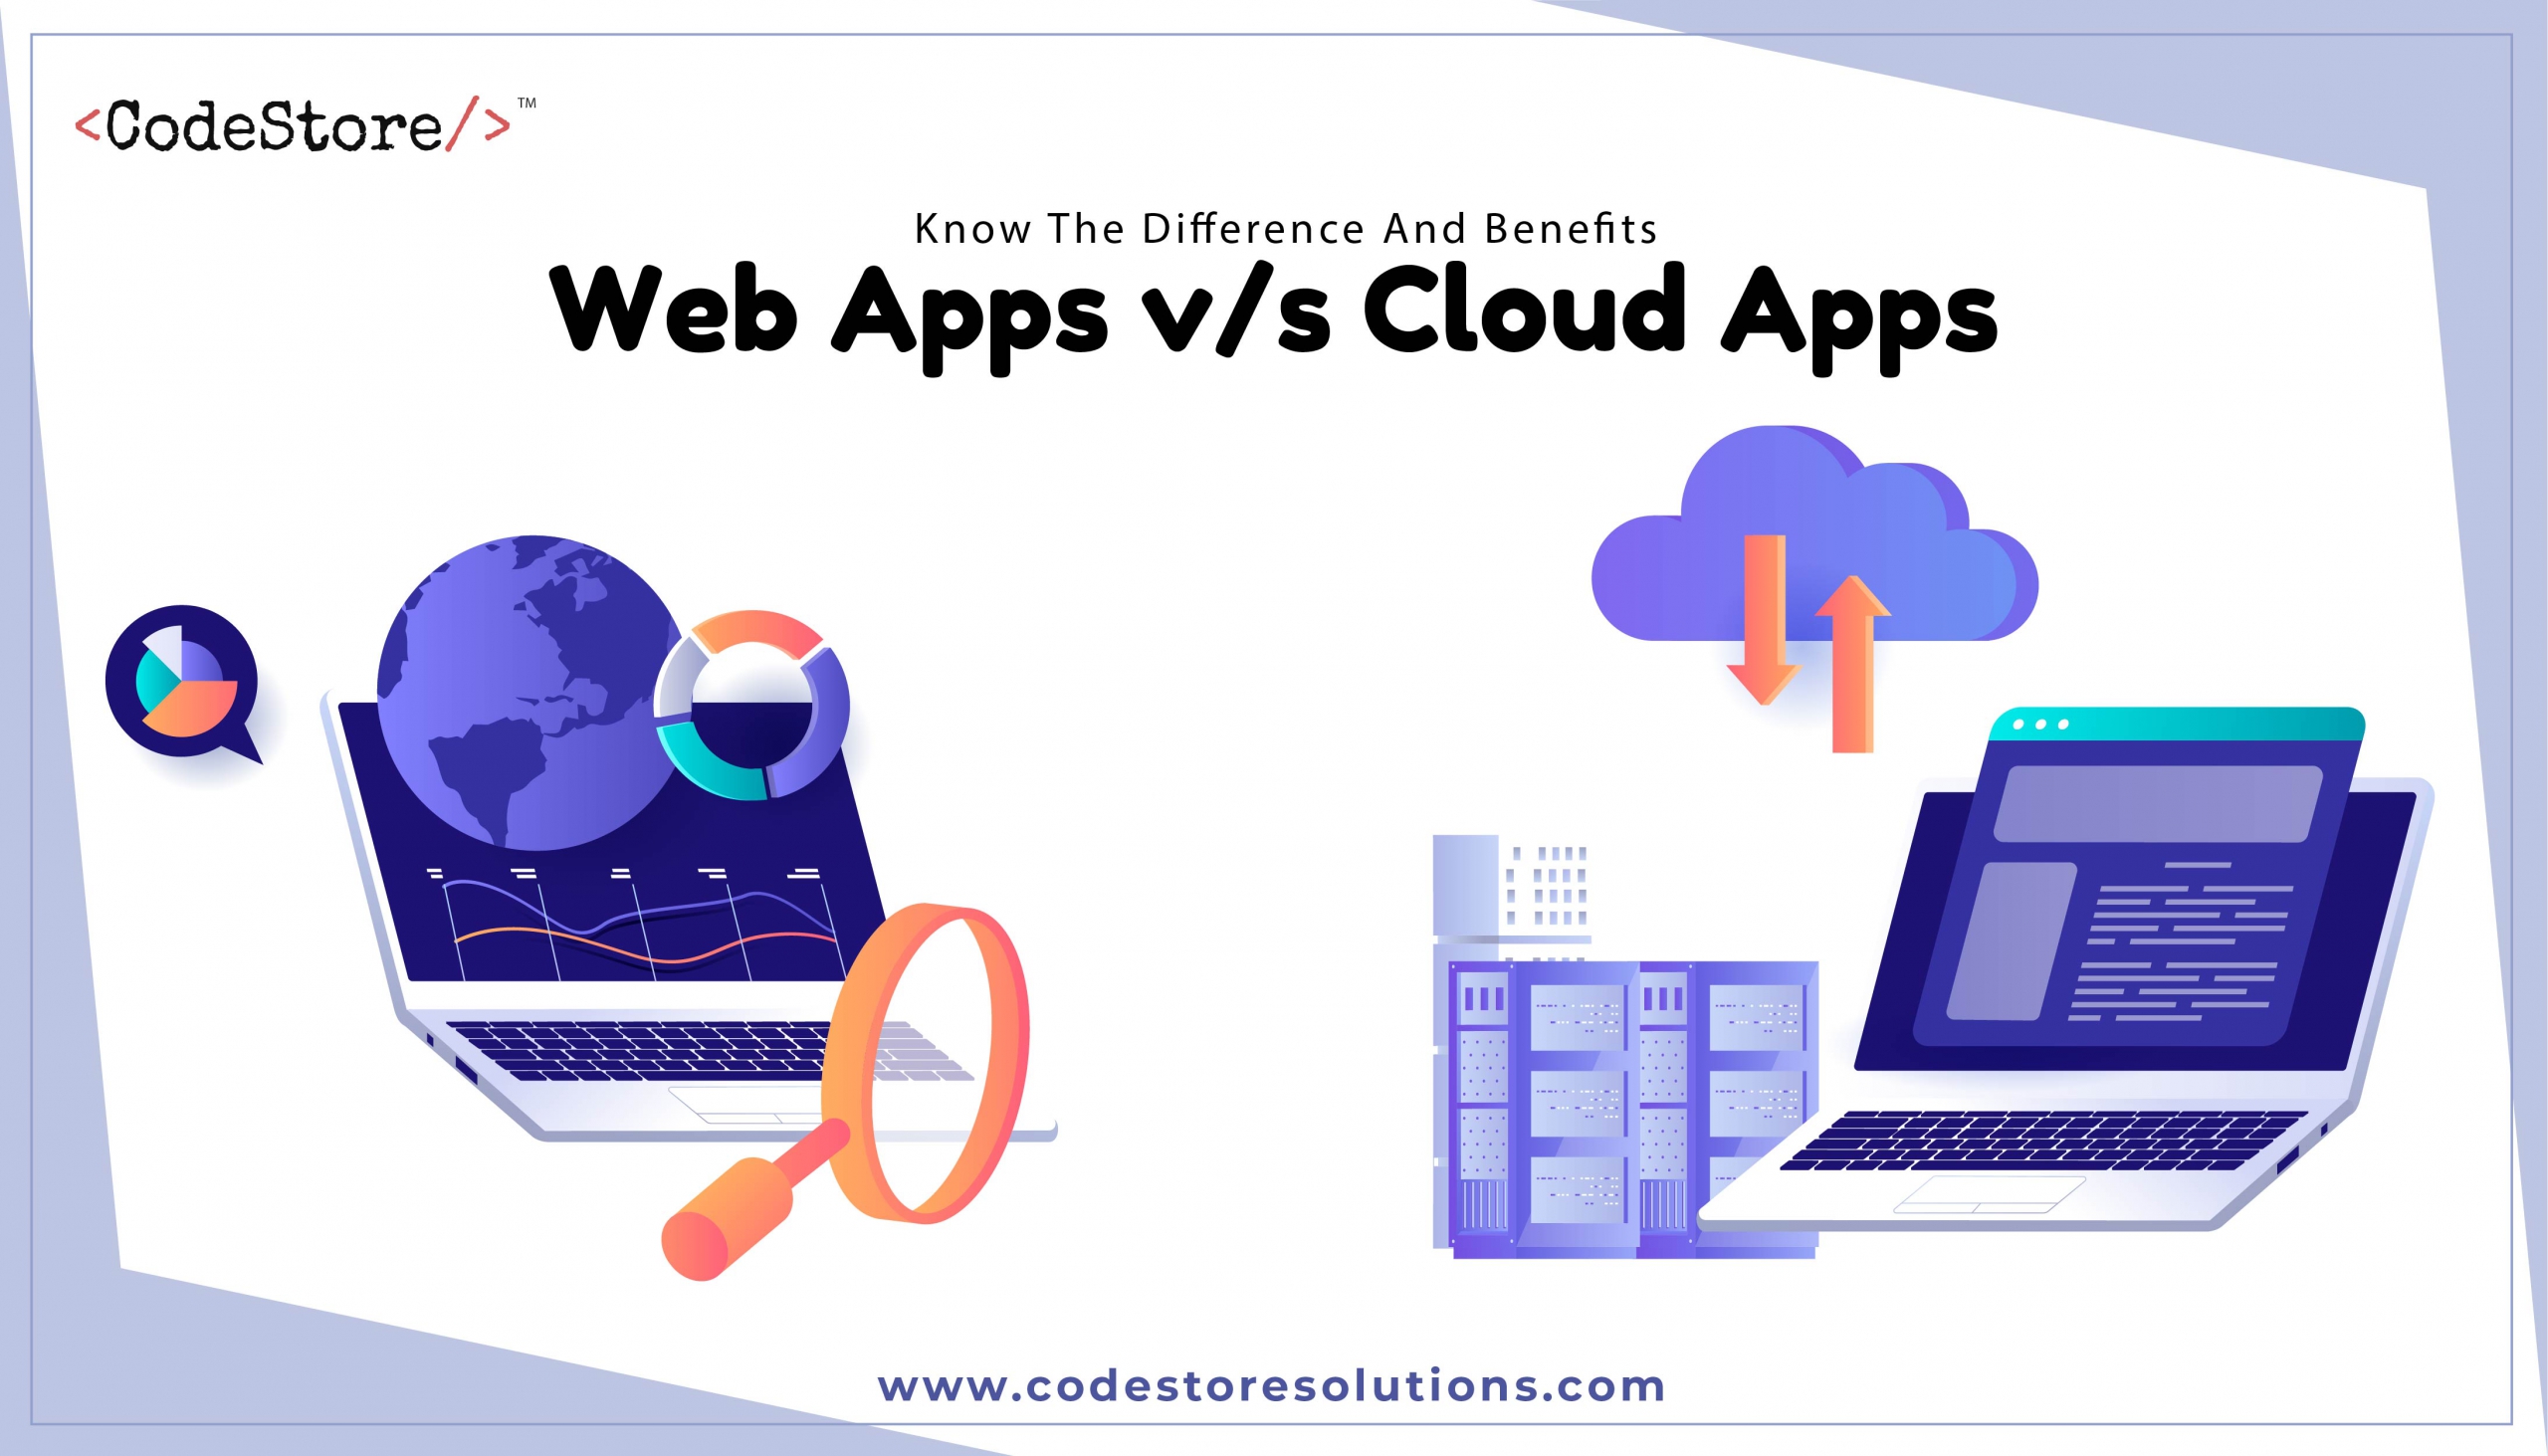 Web Apps vs Cloud Apps - Know The Difference And Benefits